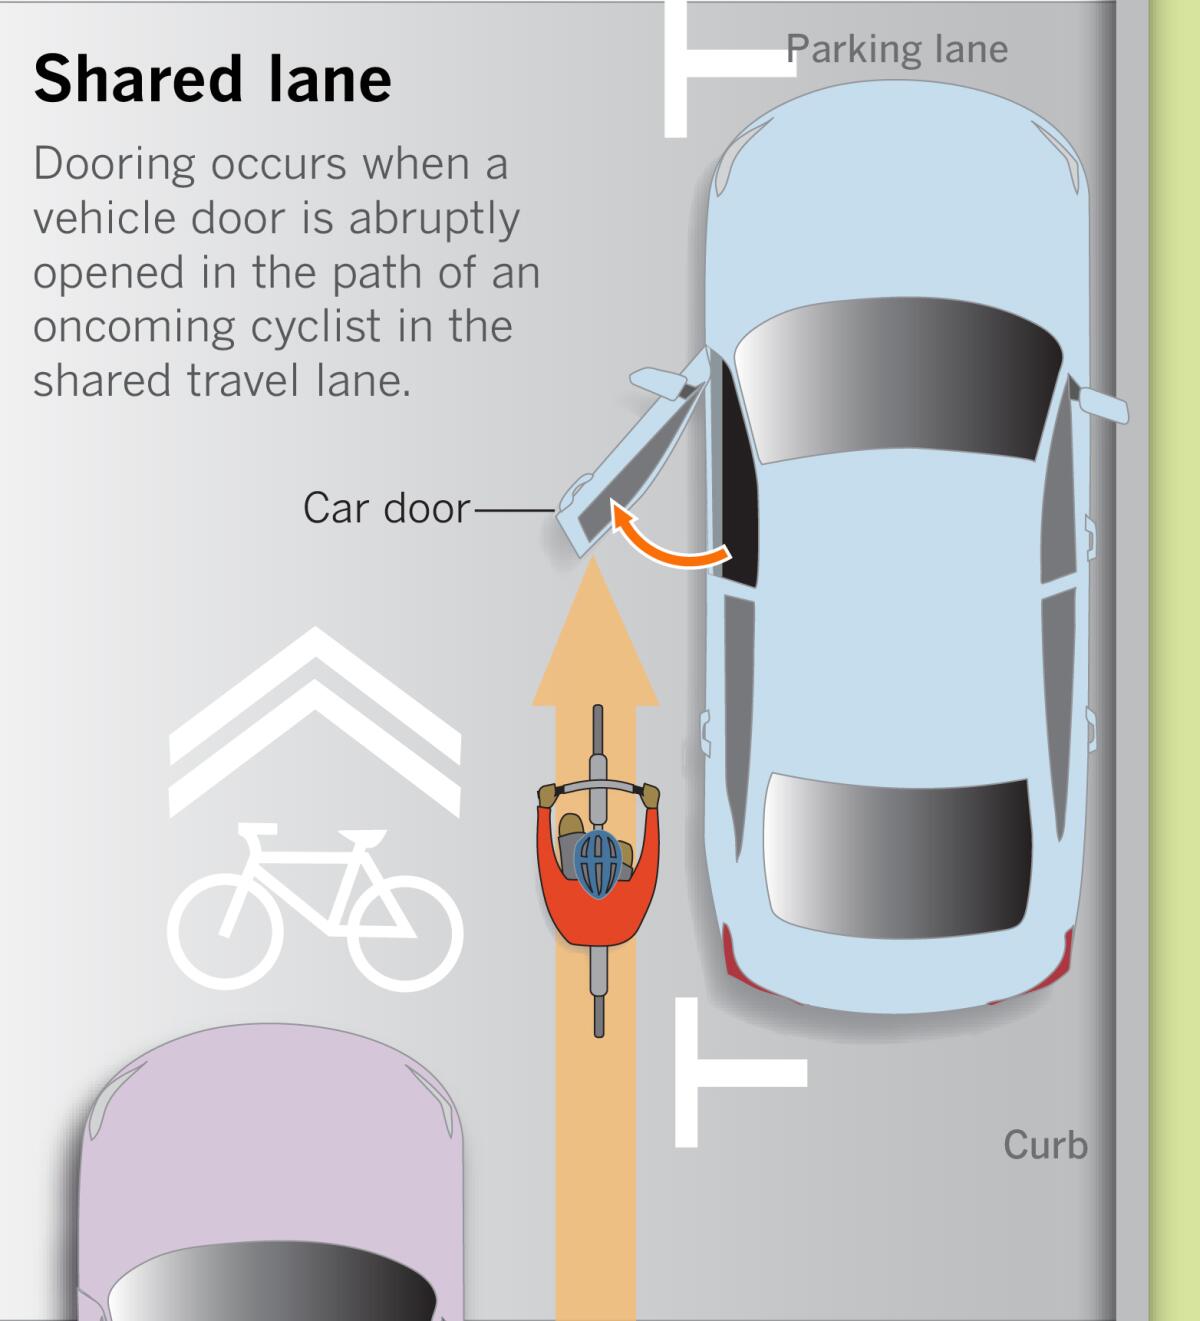 Graphic showing shared lane and "dooring" accident hazard. 